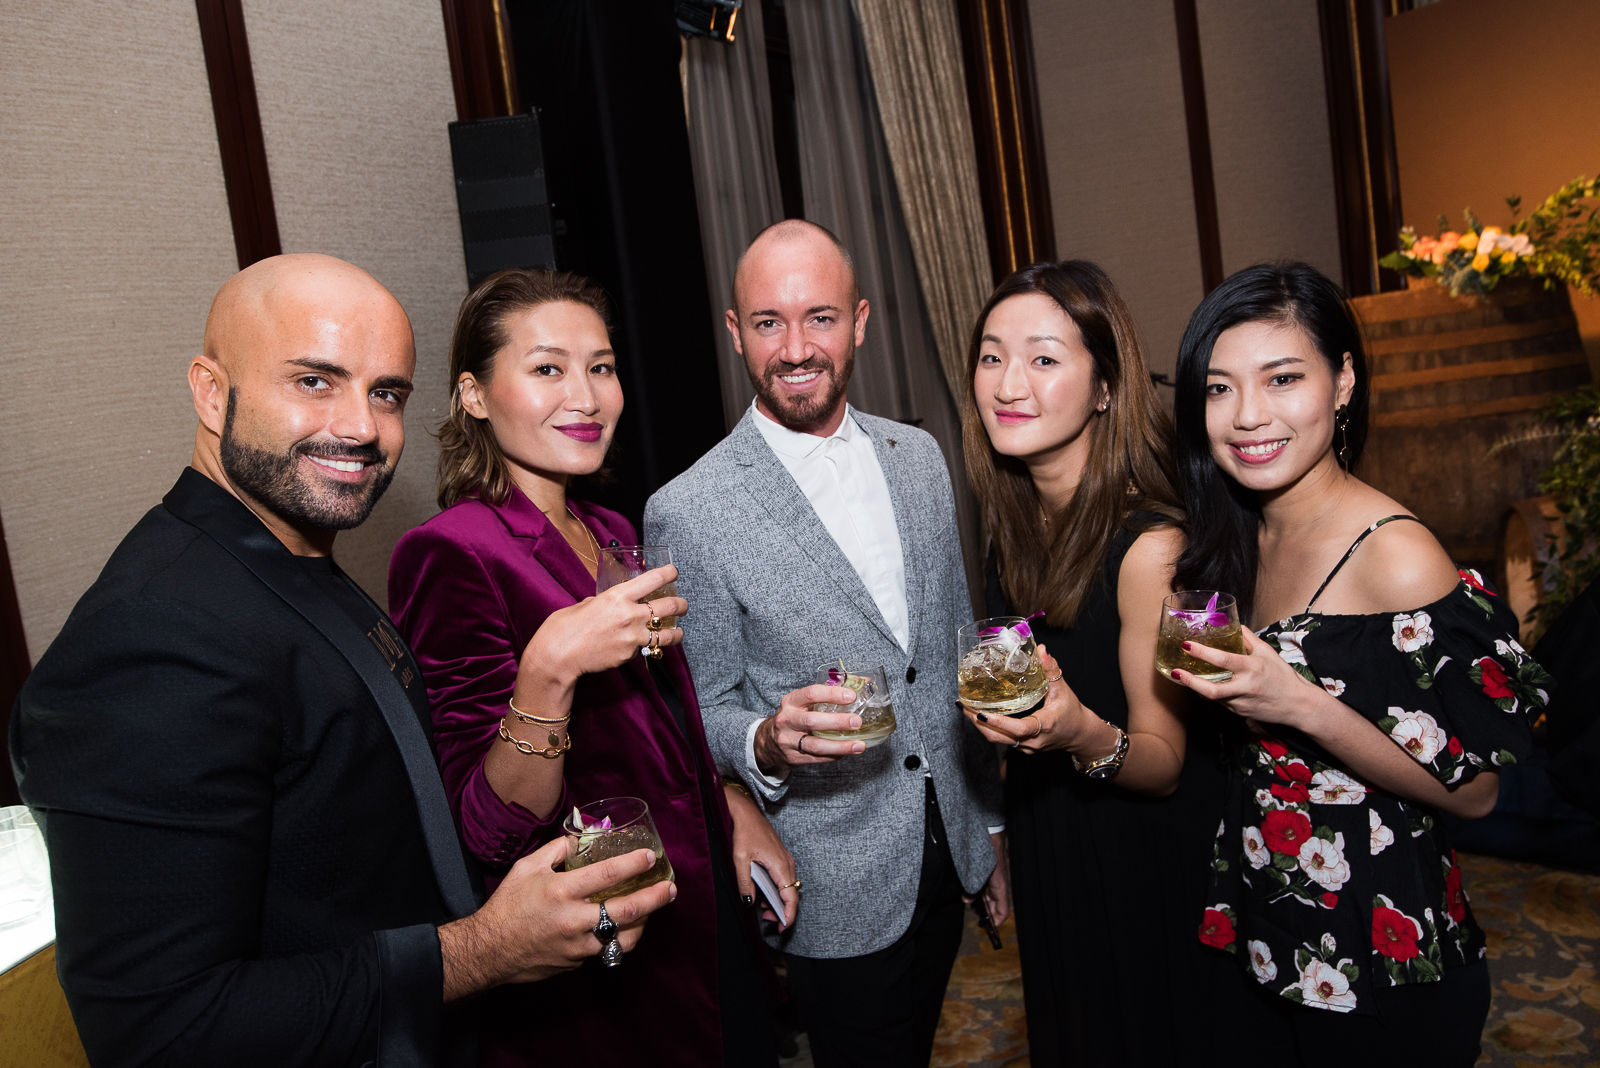 The Macallan Edition No. 3 launch party